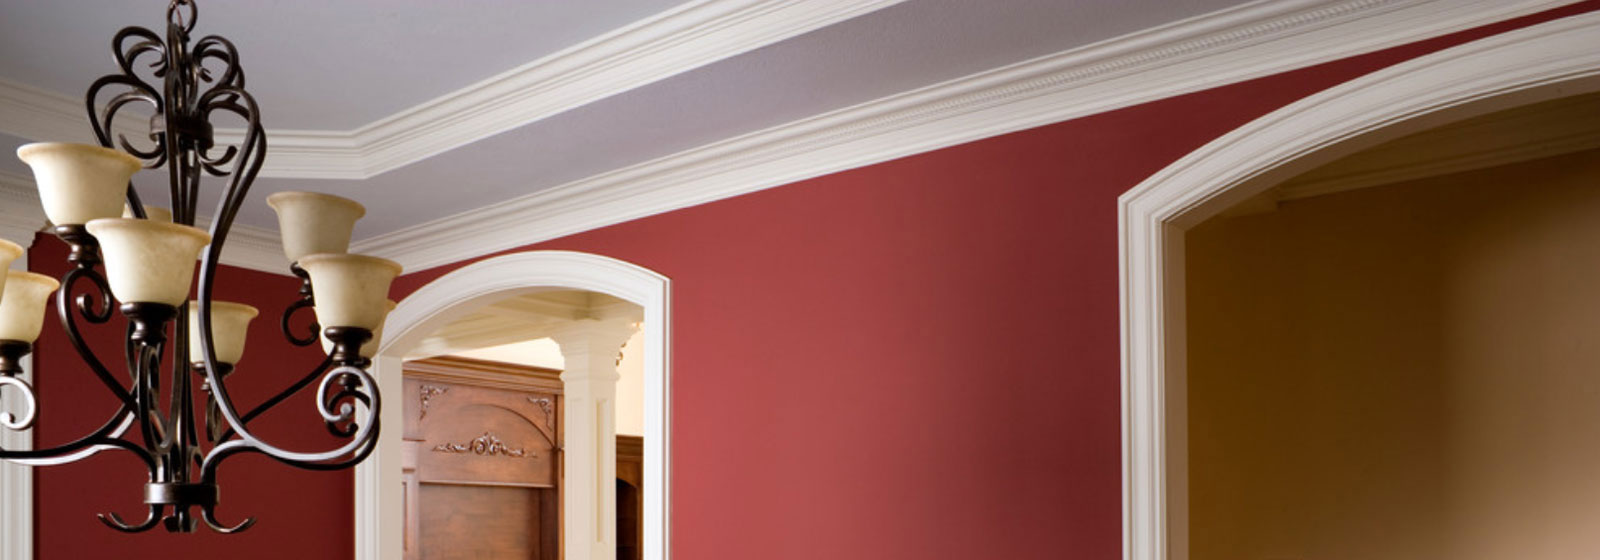 Crown Mouldings with Flexible Trim